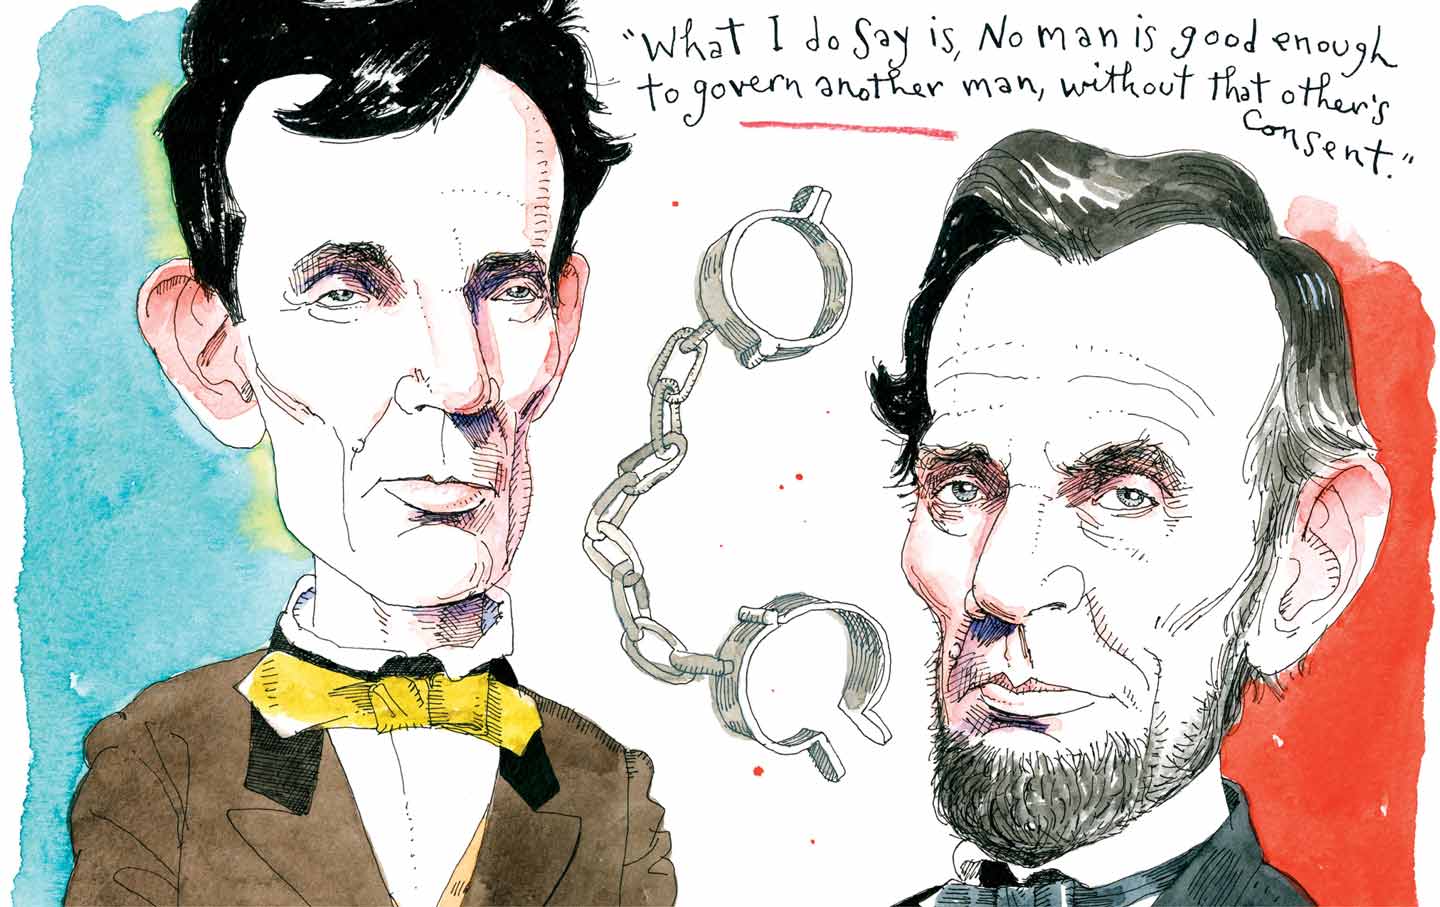 Lincoln: The Great Uncompromiser